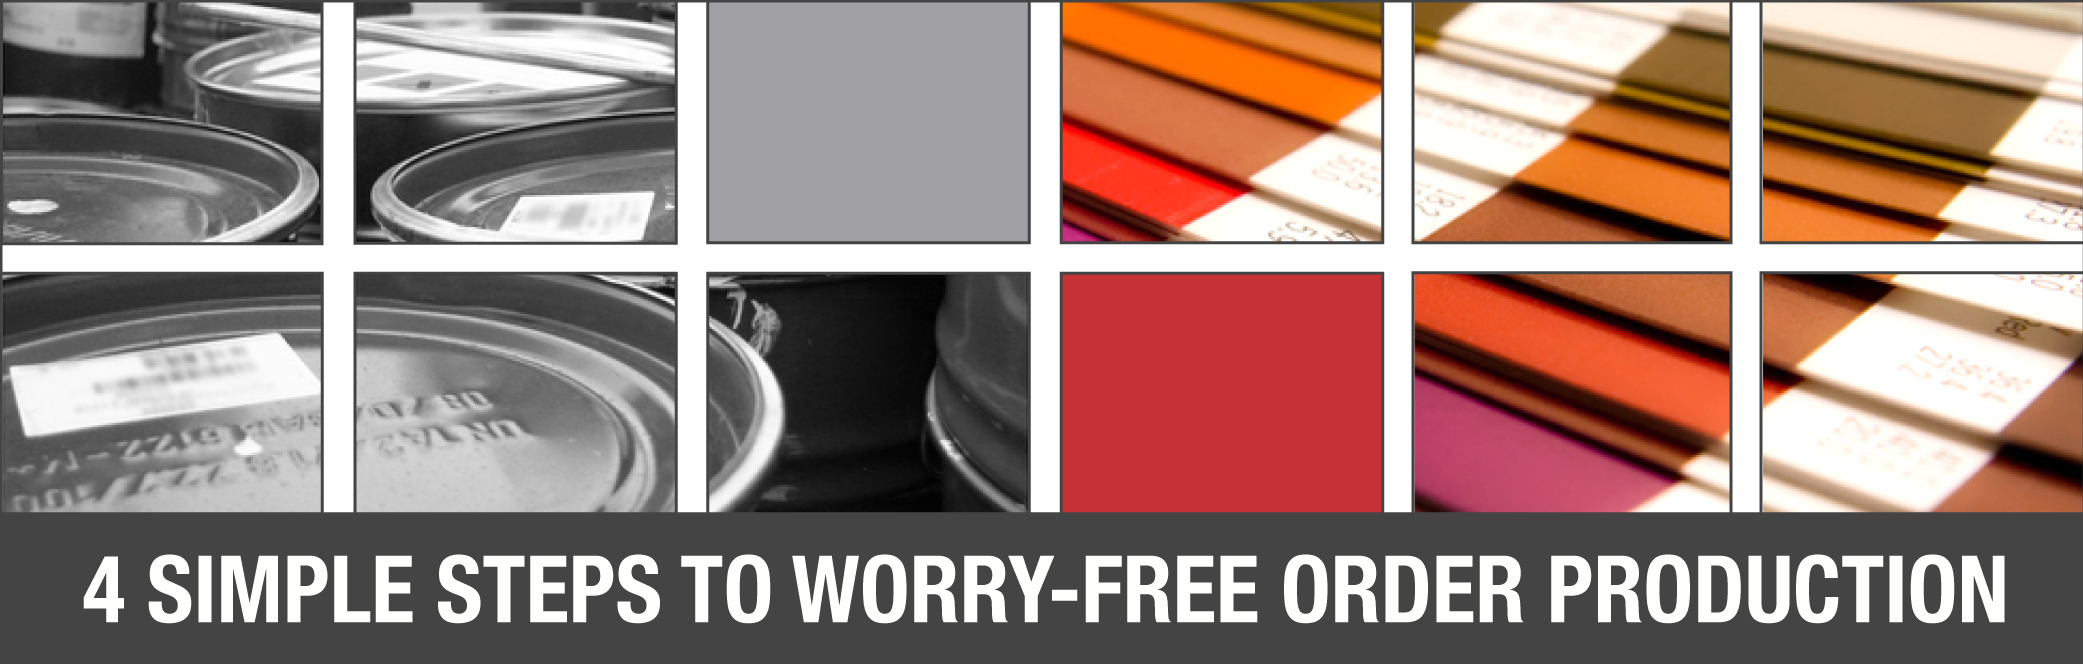 4_Simple_Steps_To_Worry_Free_Order_Production